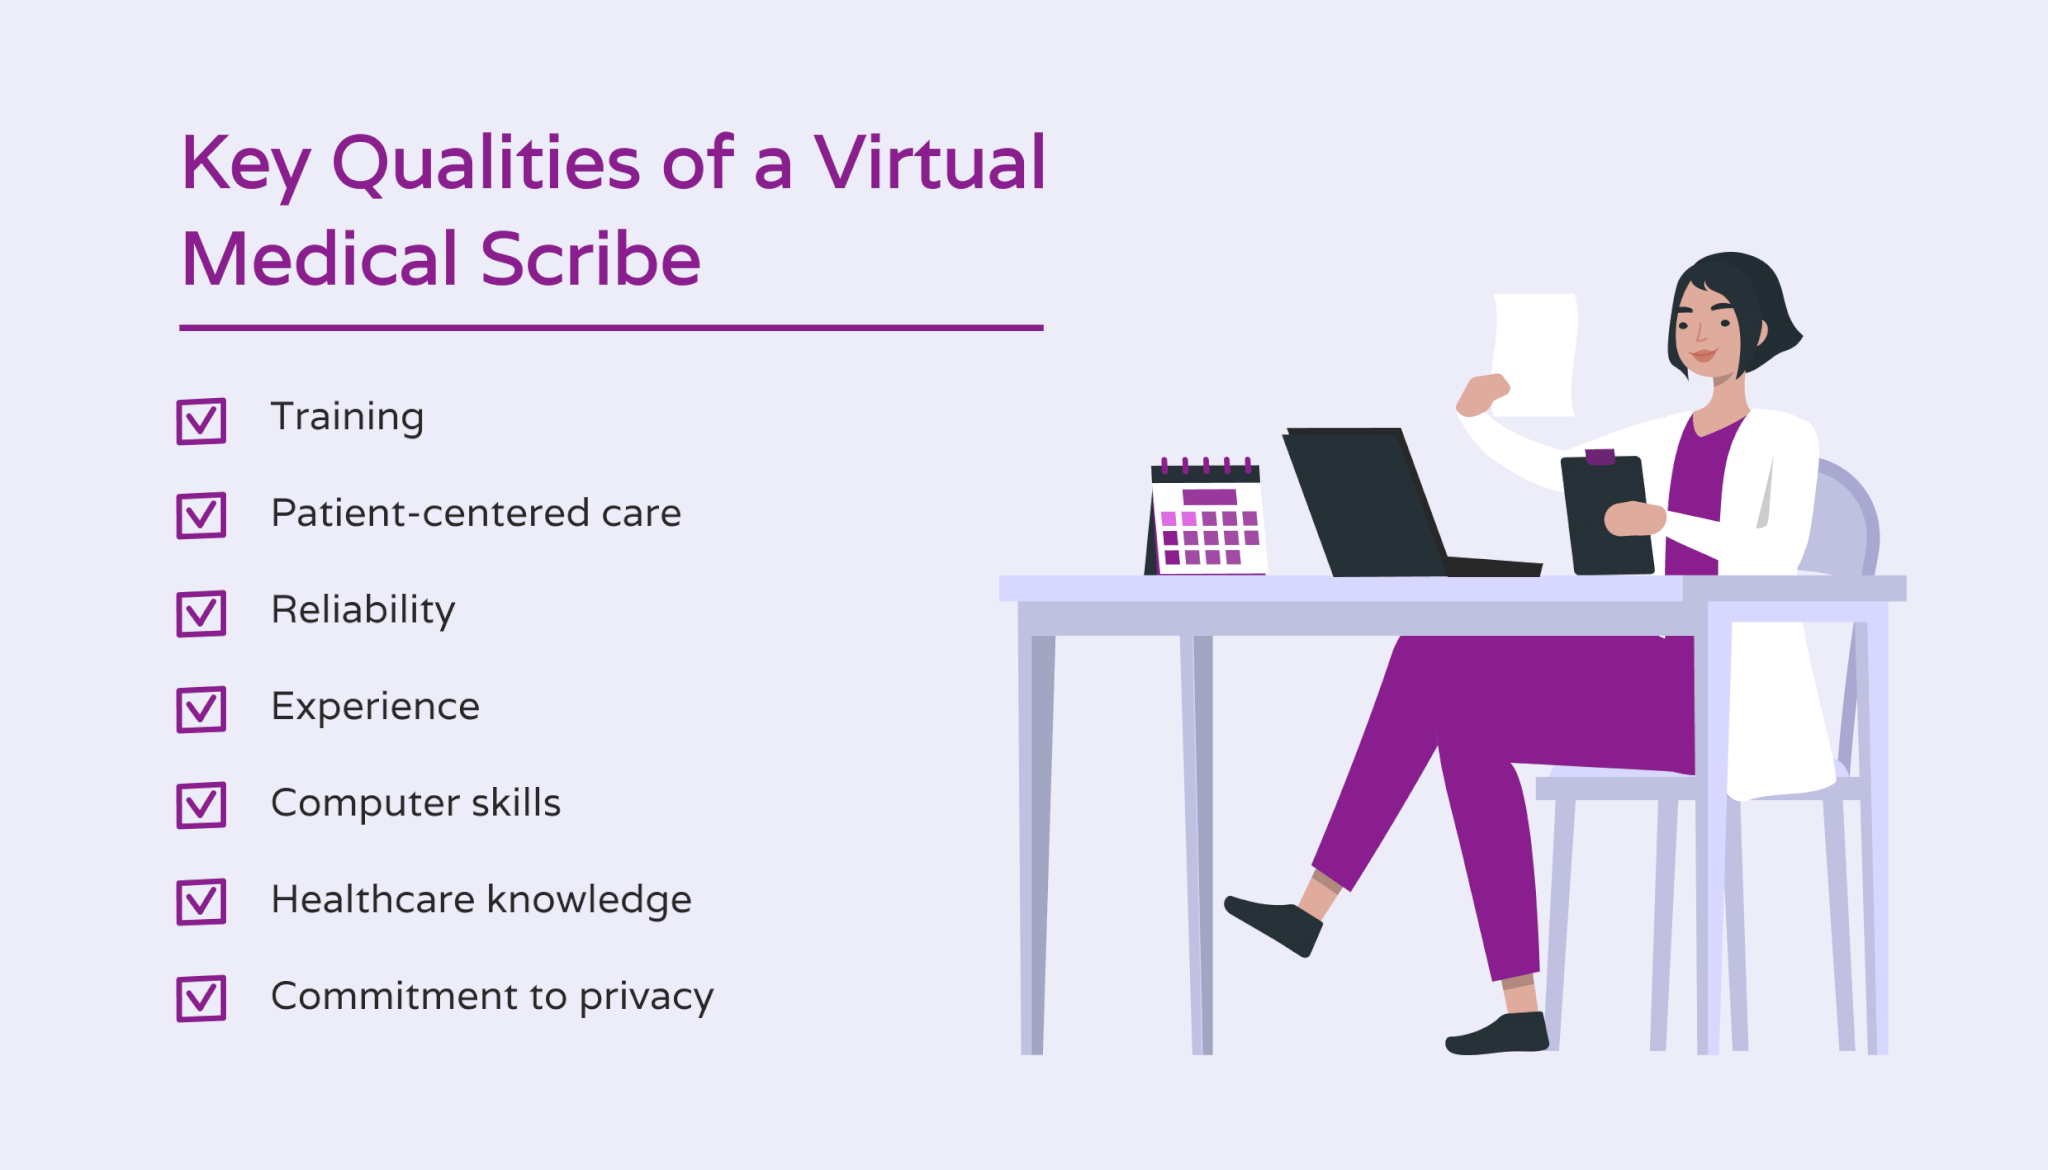 What are the key qualities of a virtual medical scribe